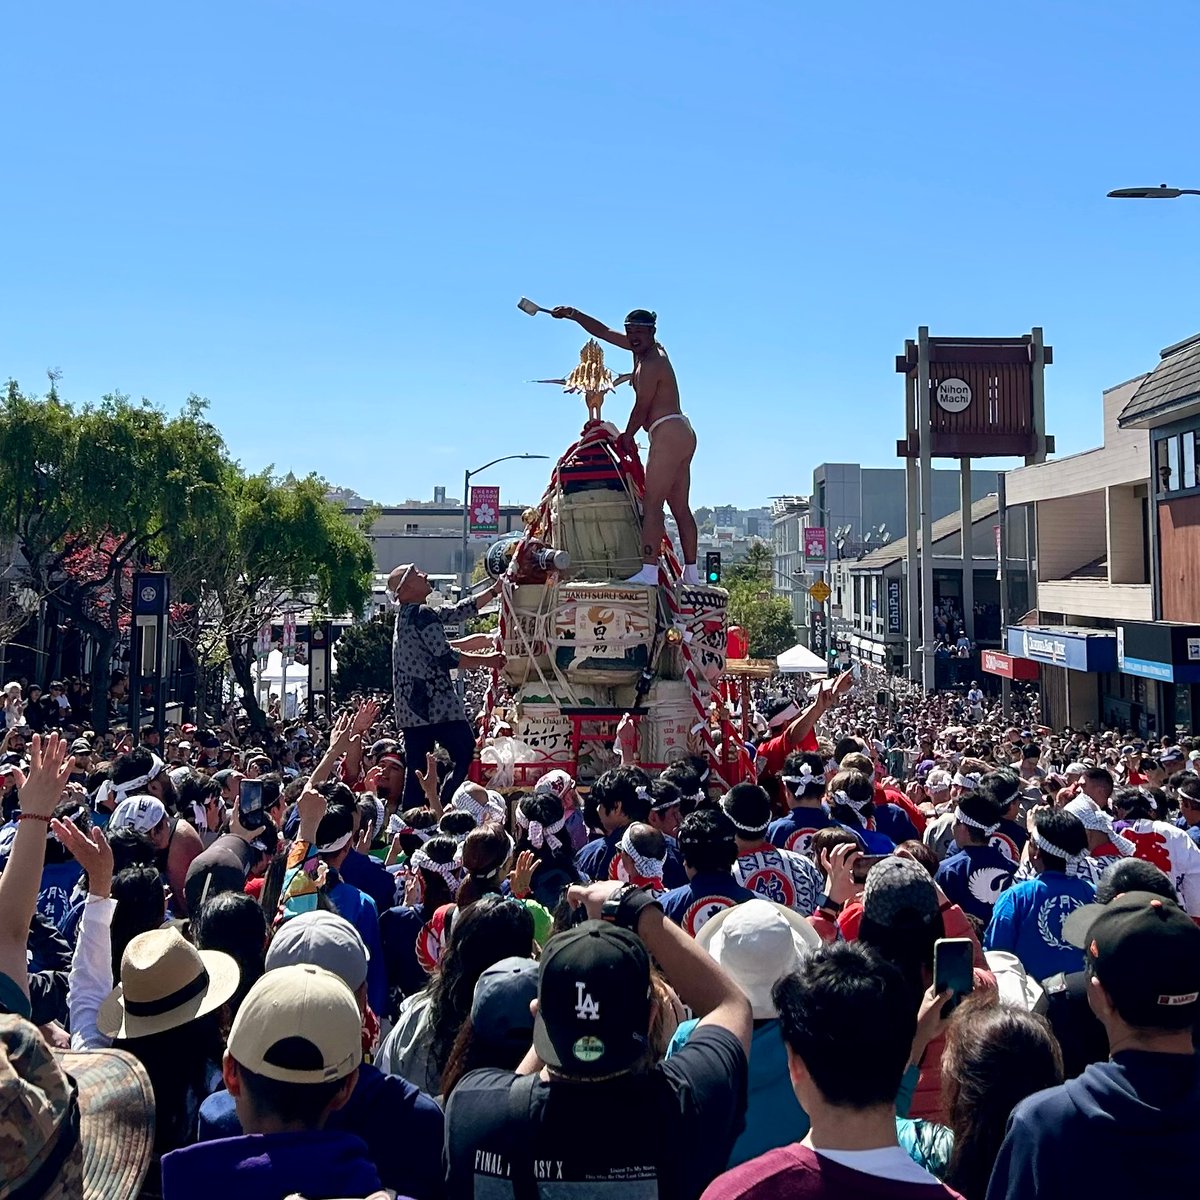 Highlights from the Cherry Blossom Festival Parade in Japantown, San Francisco 🌸

🎥: instagram.com/reel/C6C7y2srX…

#sanfrancisco #japantownsf #cherryblossomfestival